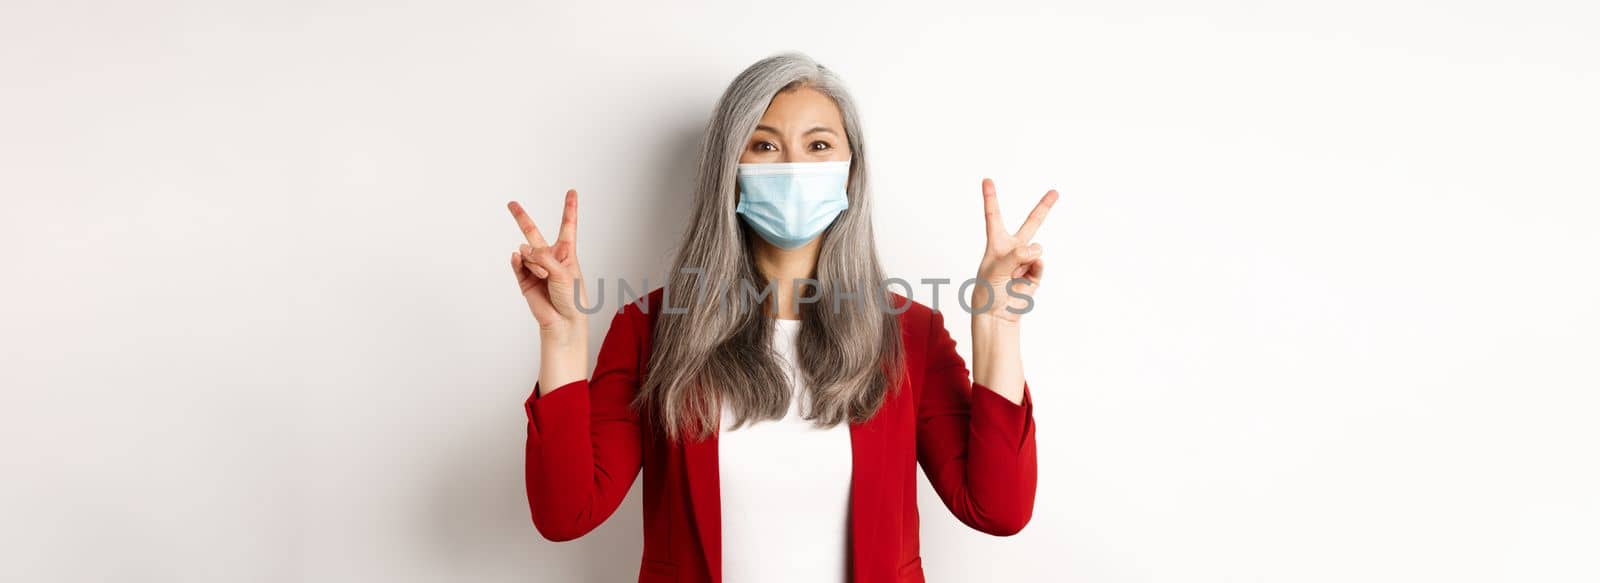 Coronavirus and business concept. Cheerful senior woman in face mask, showing victory or peace sign and smiling with eyes, white background.